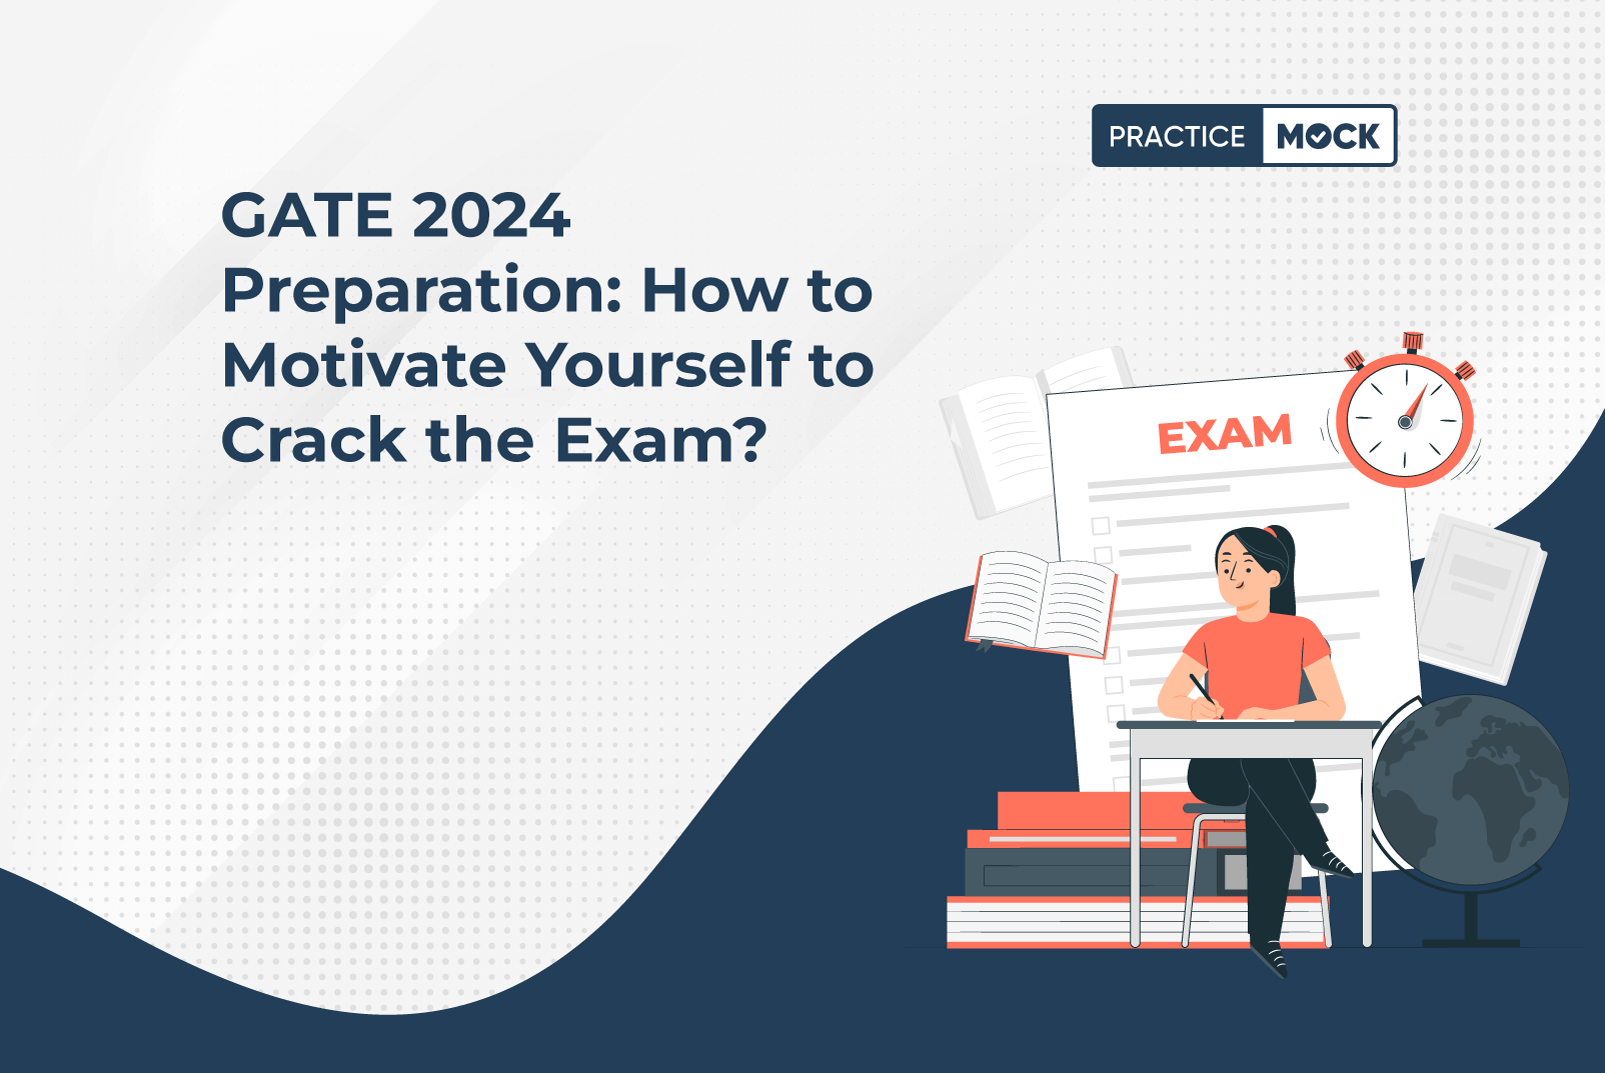 GATE 2024 Preparation: Motivating Yourself to Crack the Exam